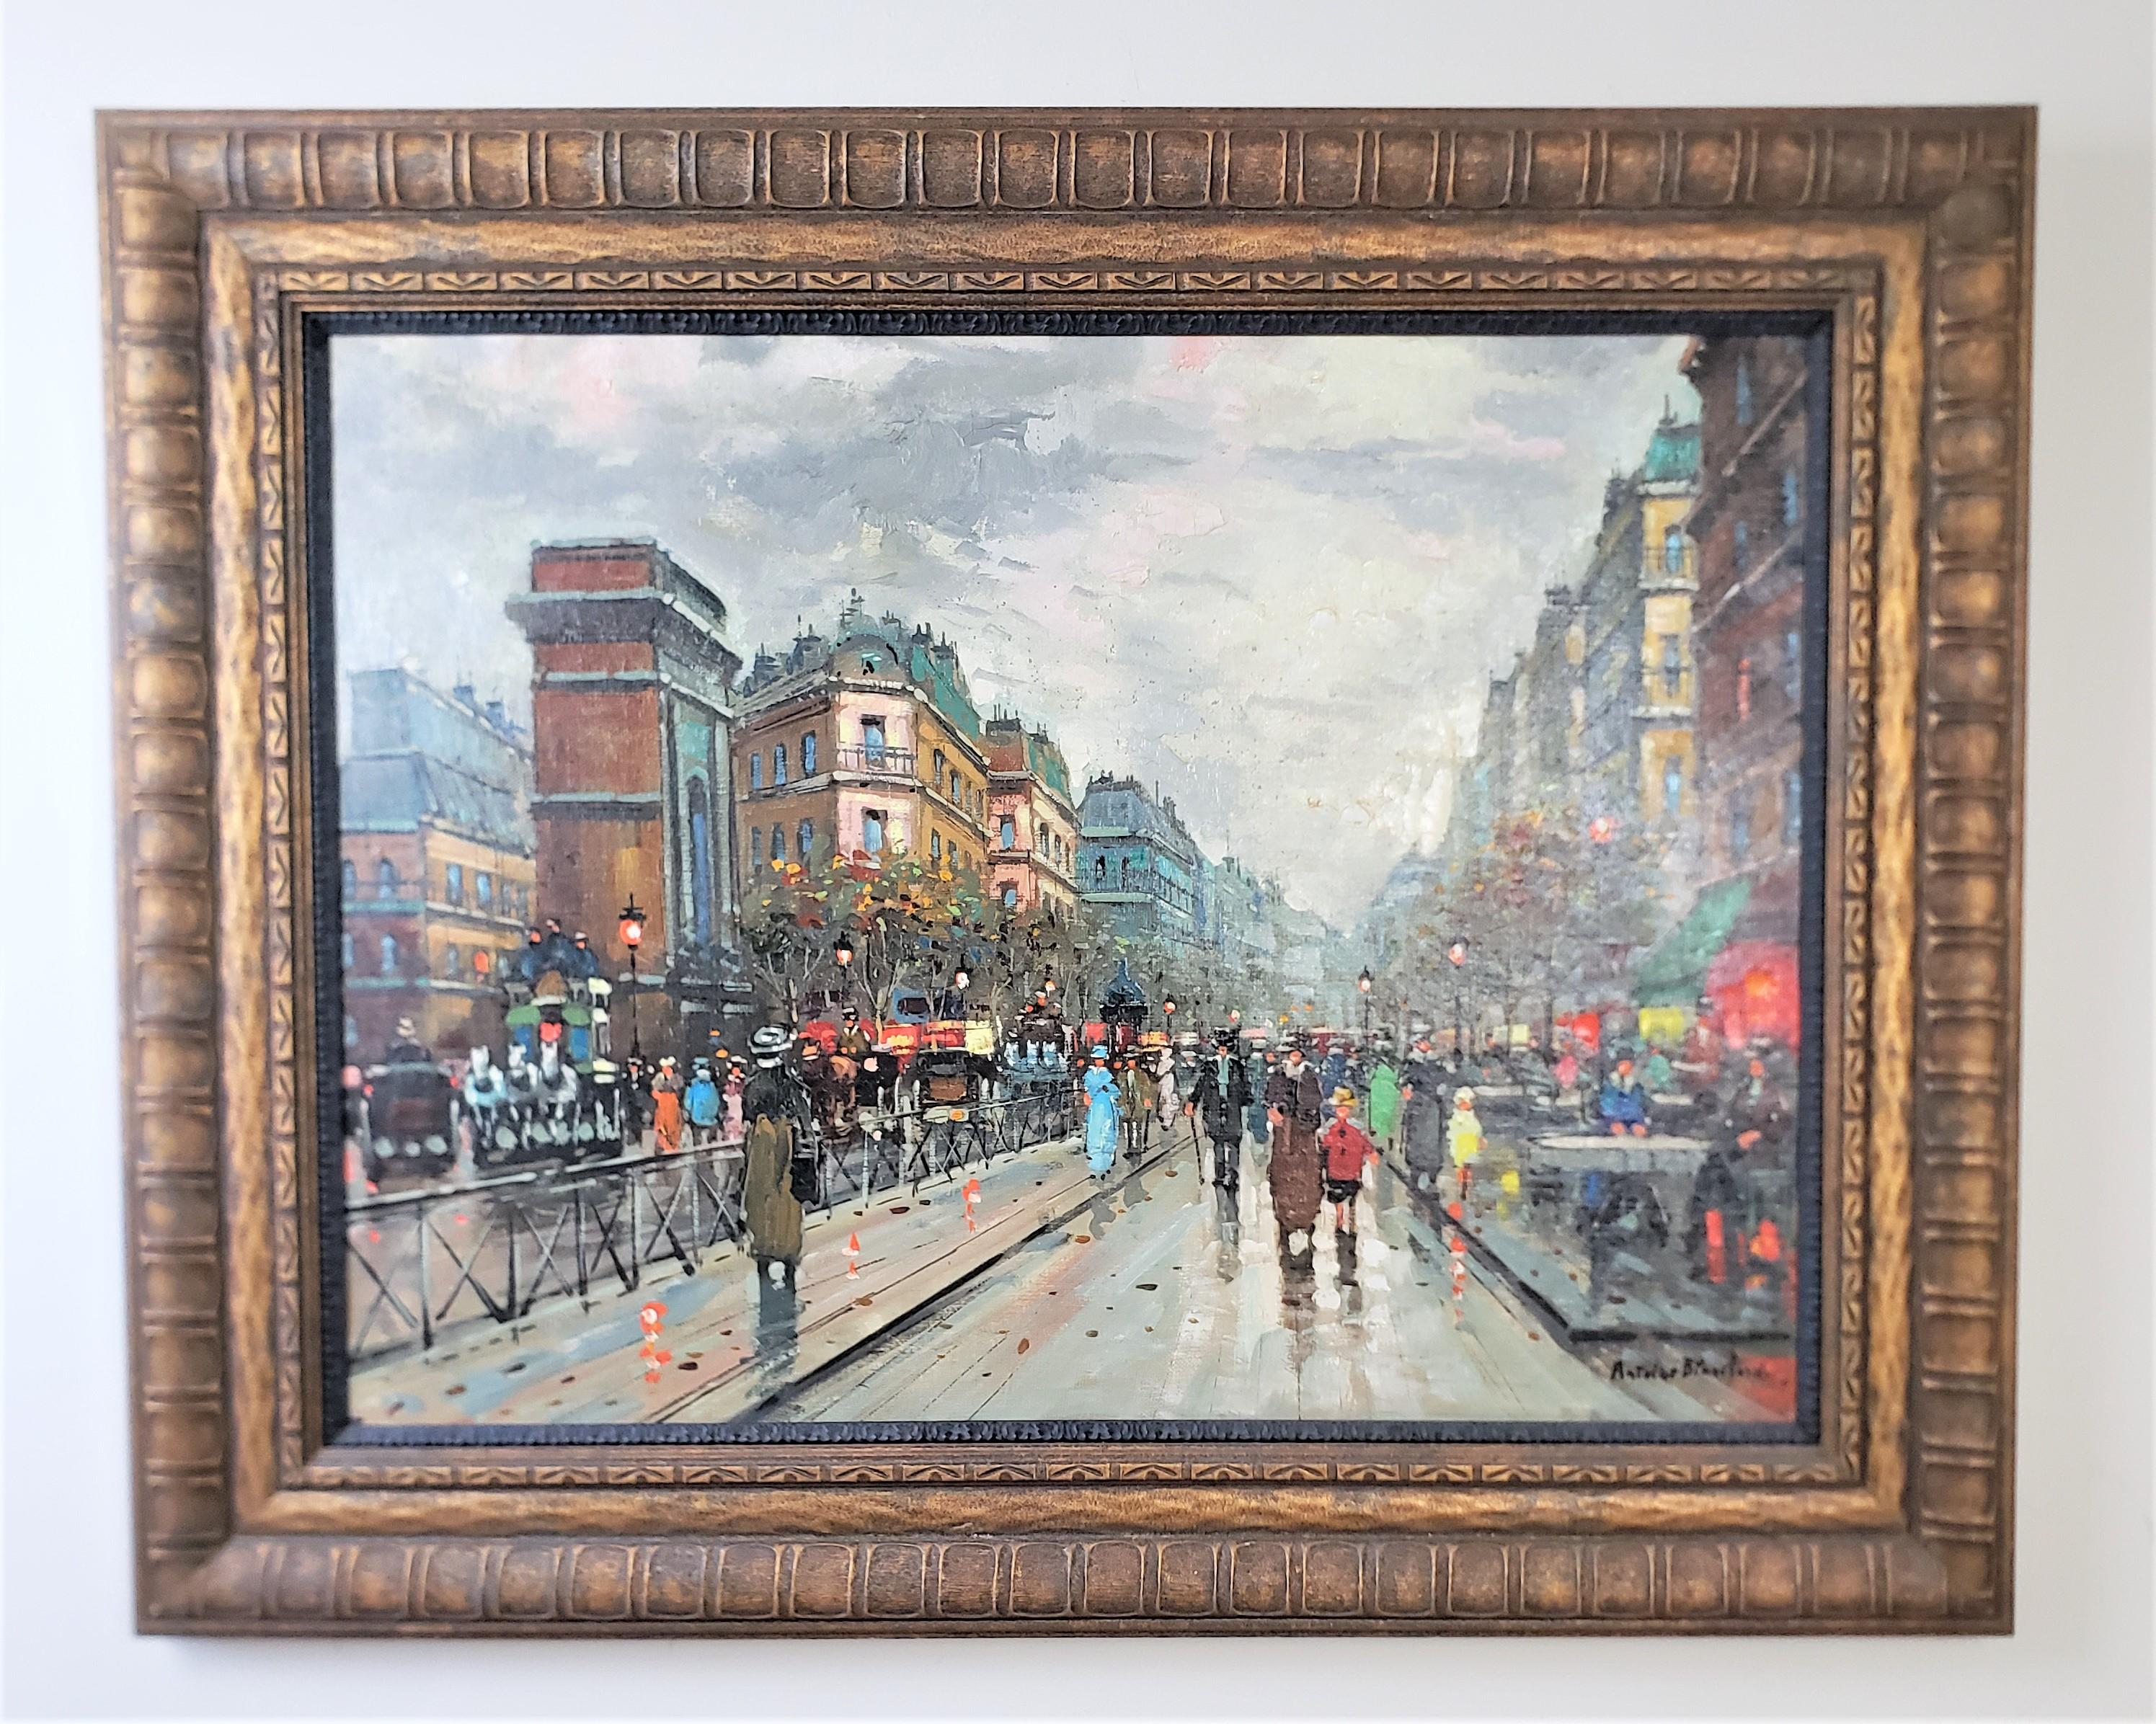 This large antique origina painting was done by well known Anoine Blanchard of France in approximately 1920 in his signature Impressionistic style. The painting is done with oil paint on canvas and depicts a Parisian street scene. The painting is